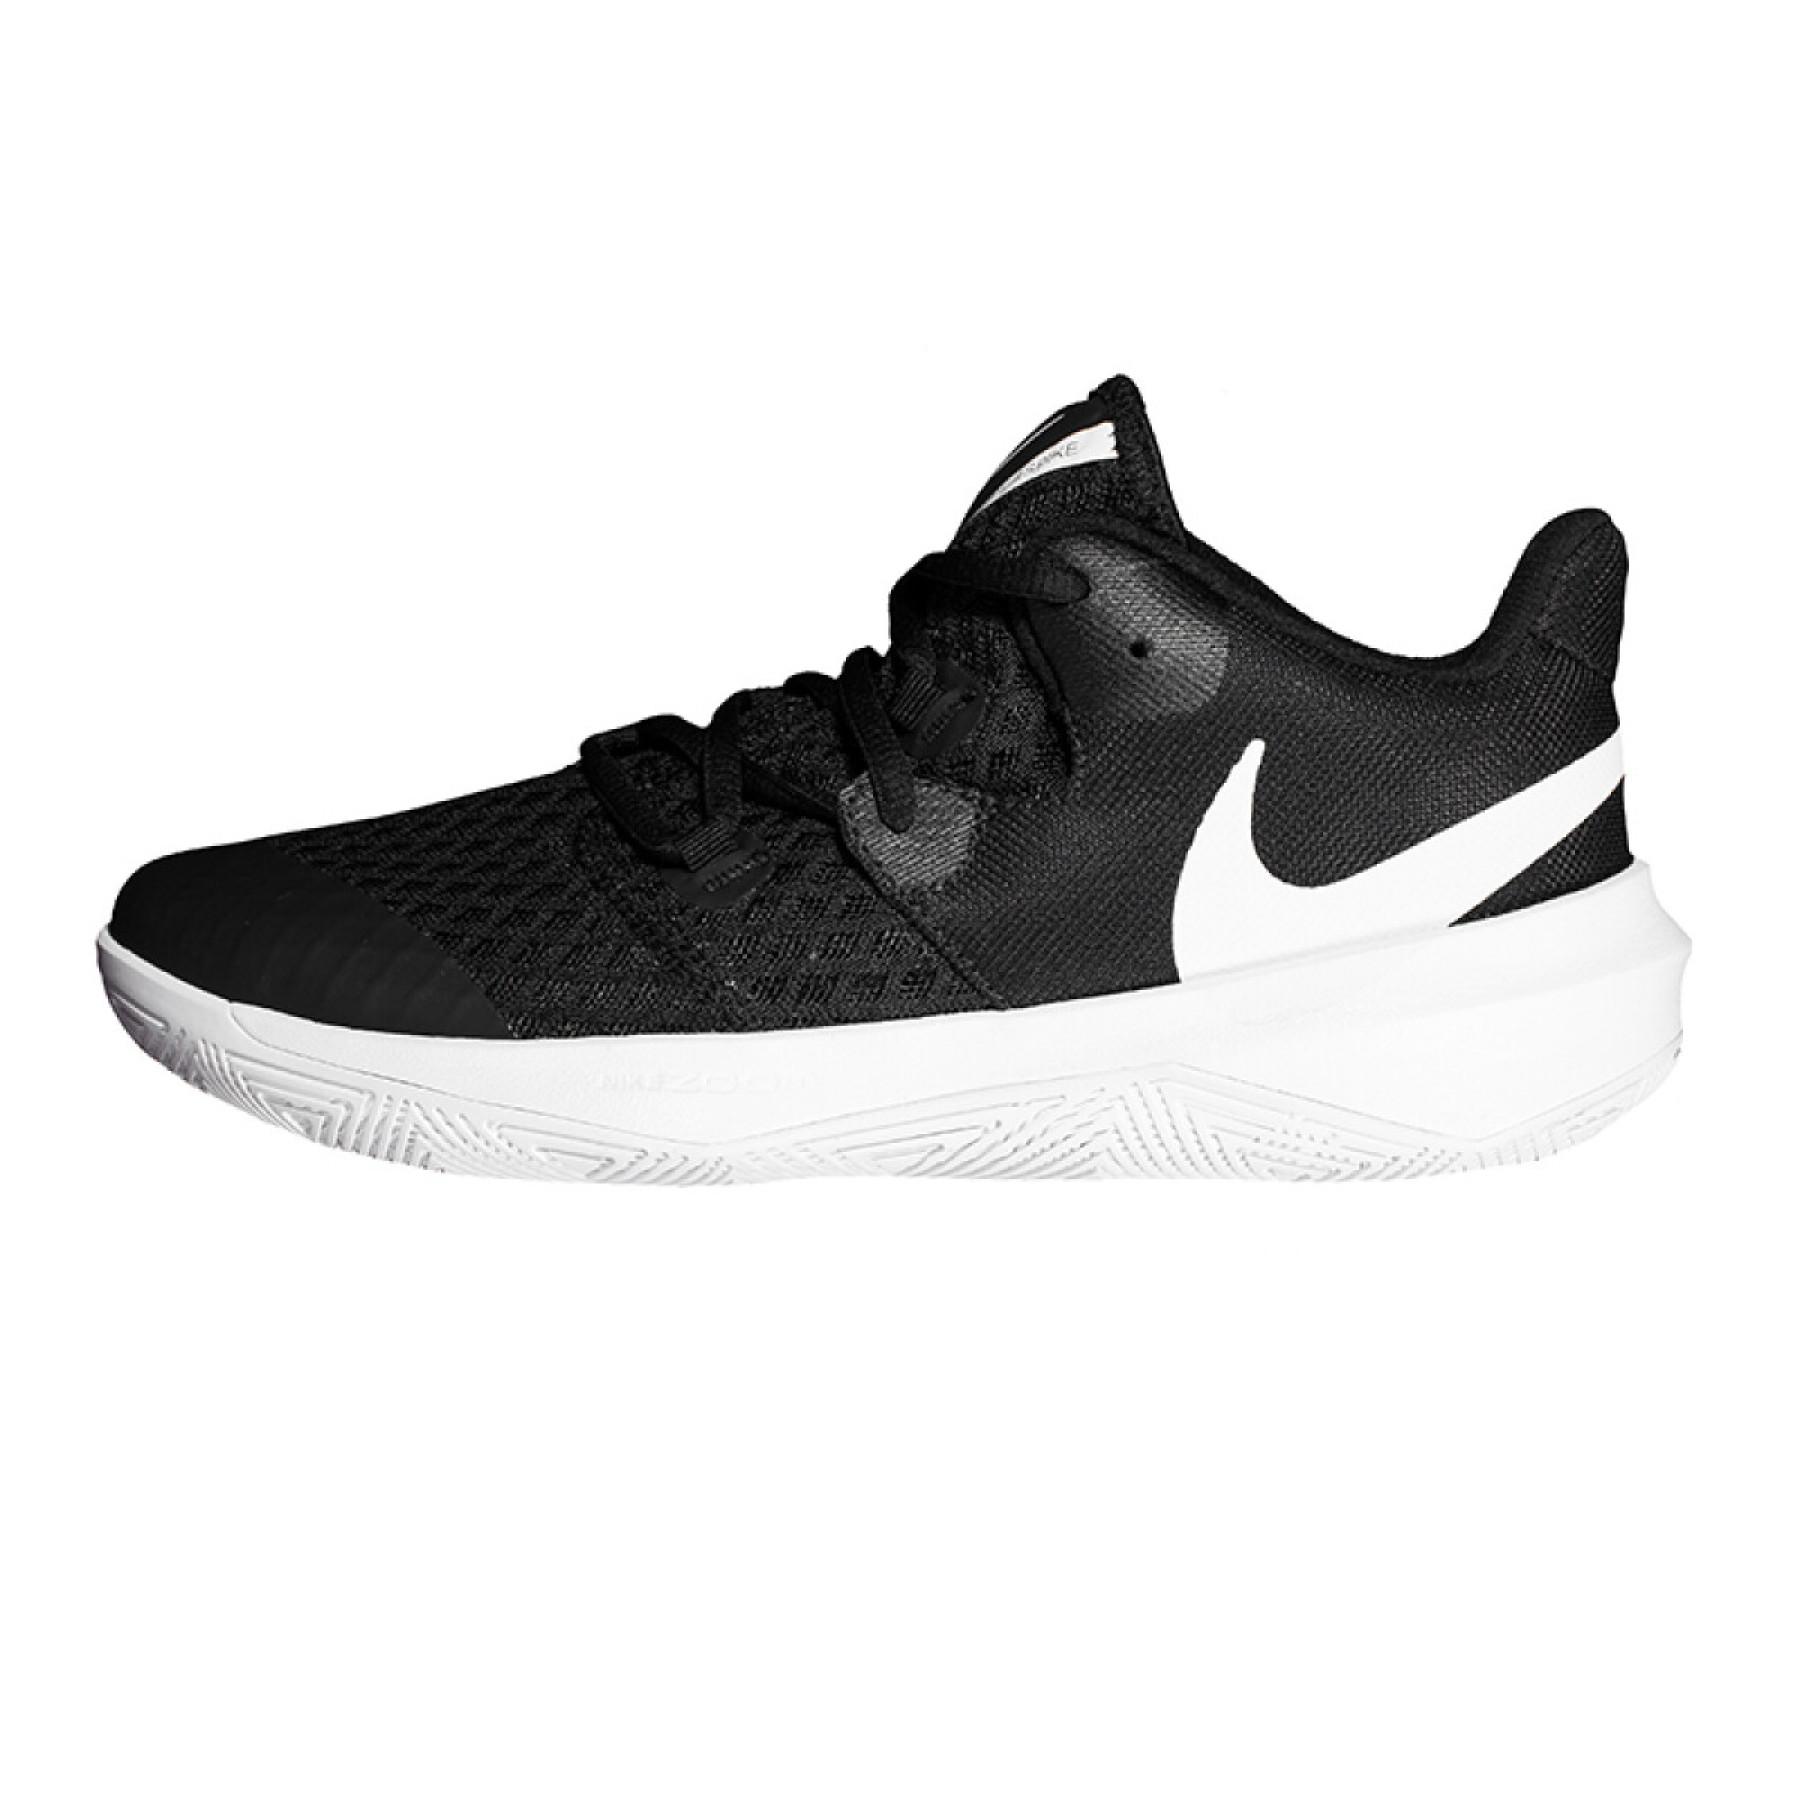 Chaussures Nike Hyperspeed Court